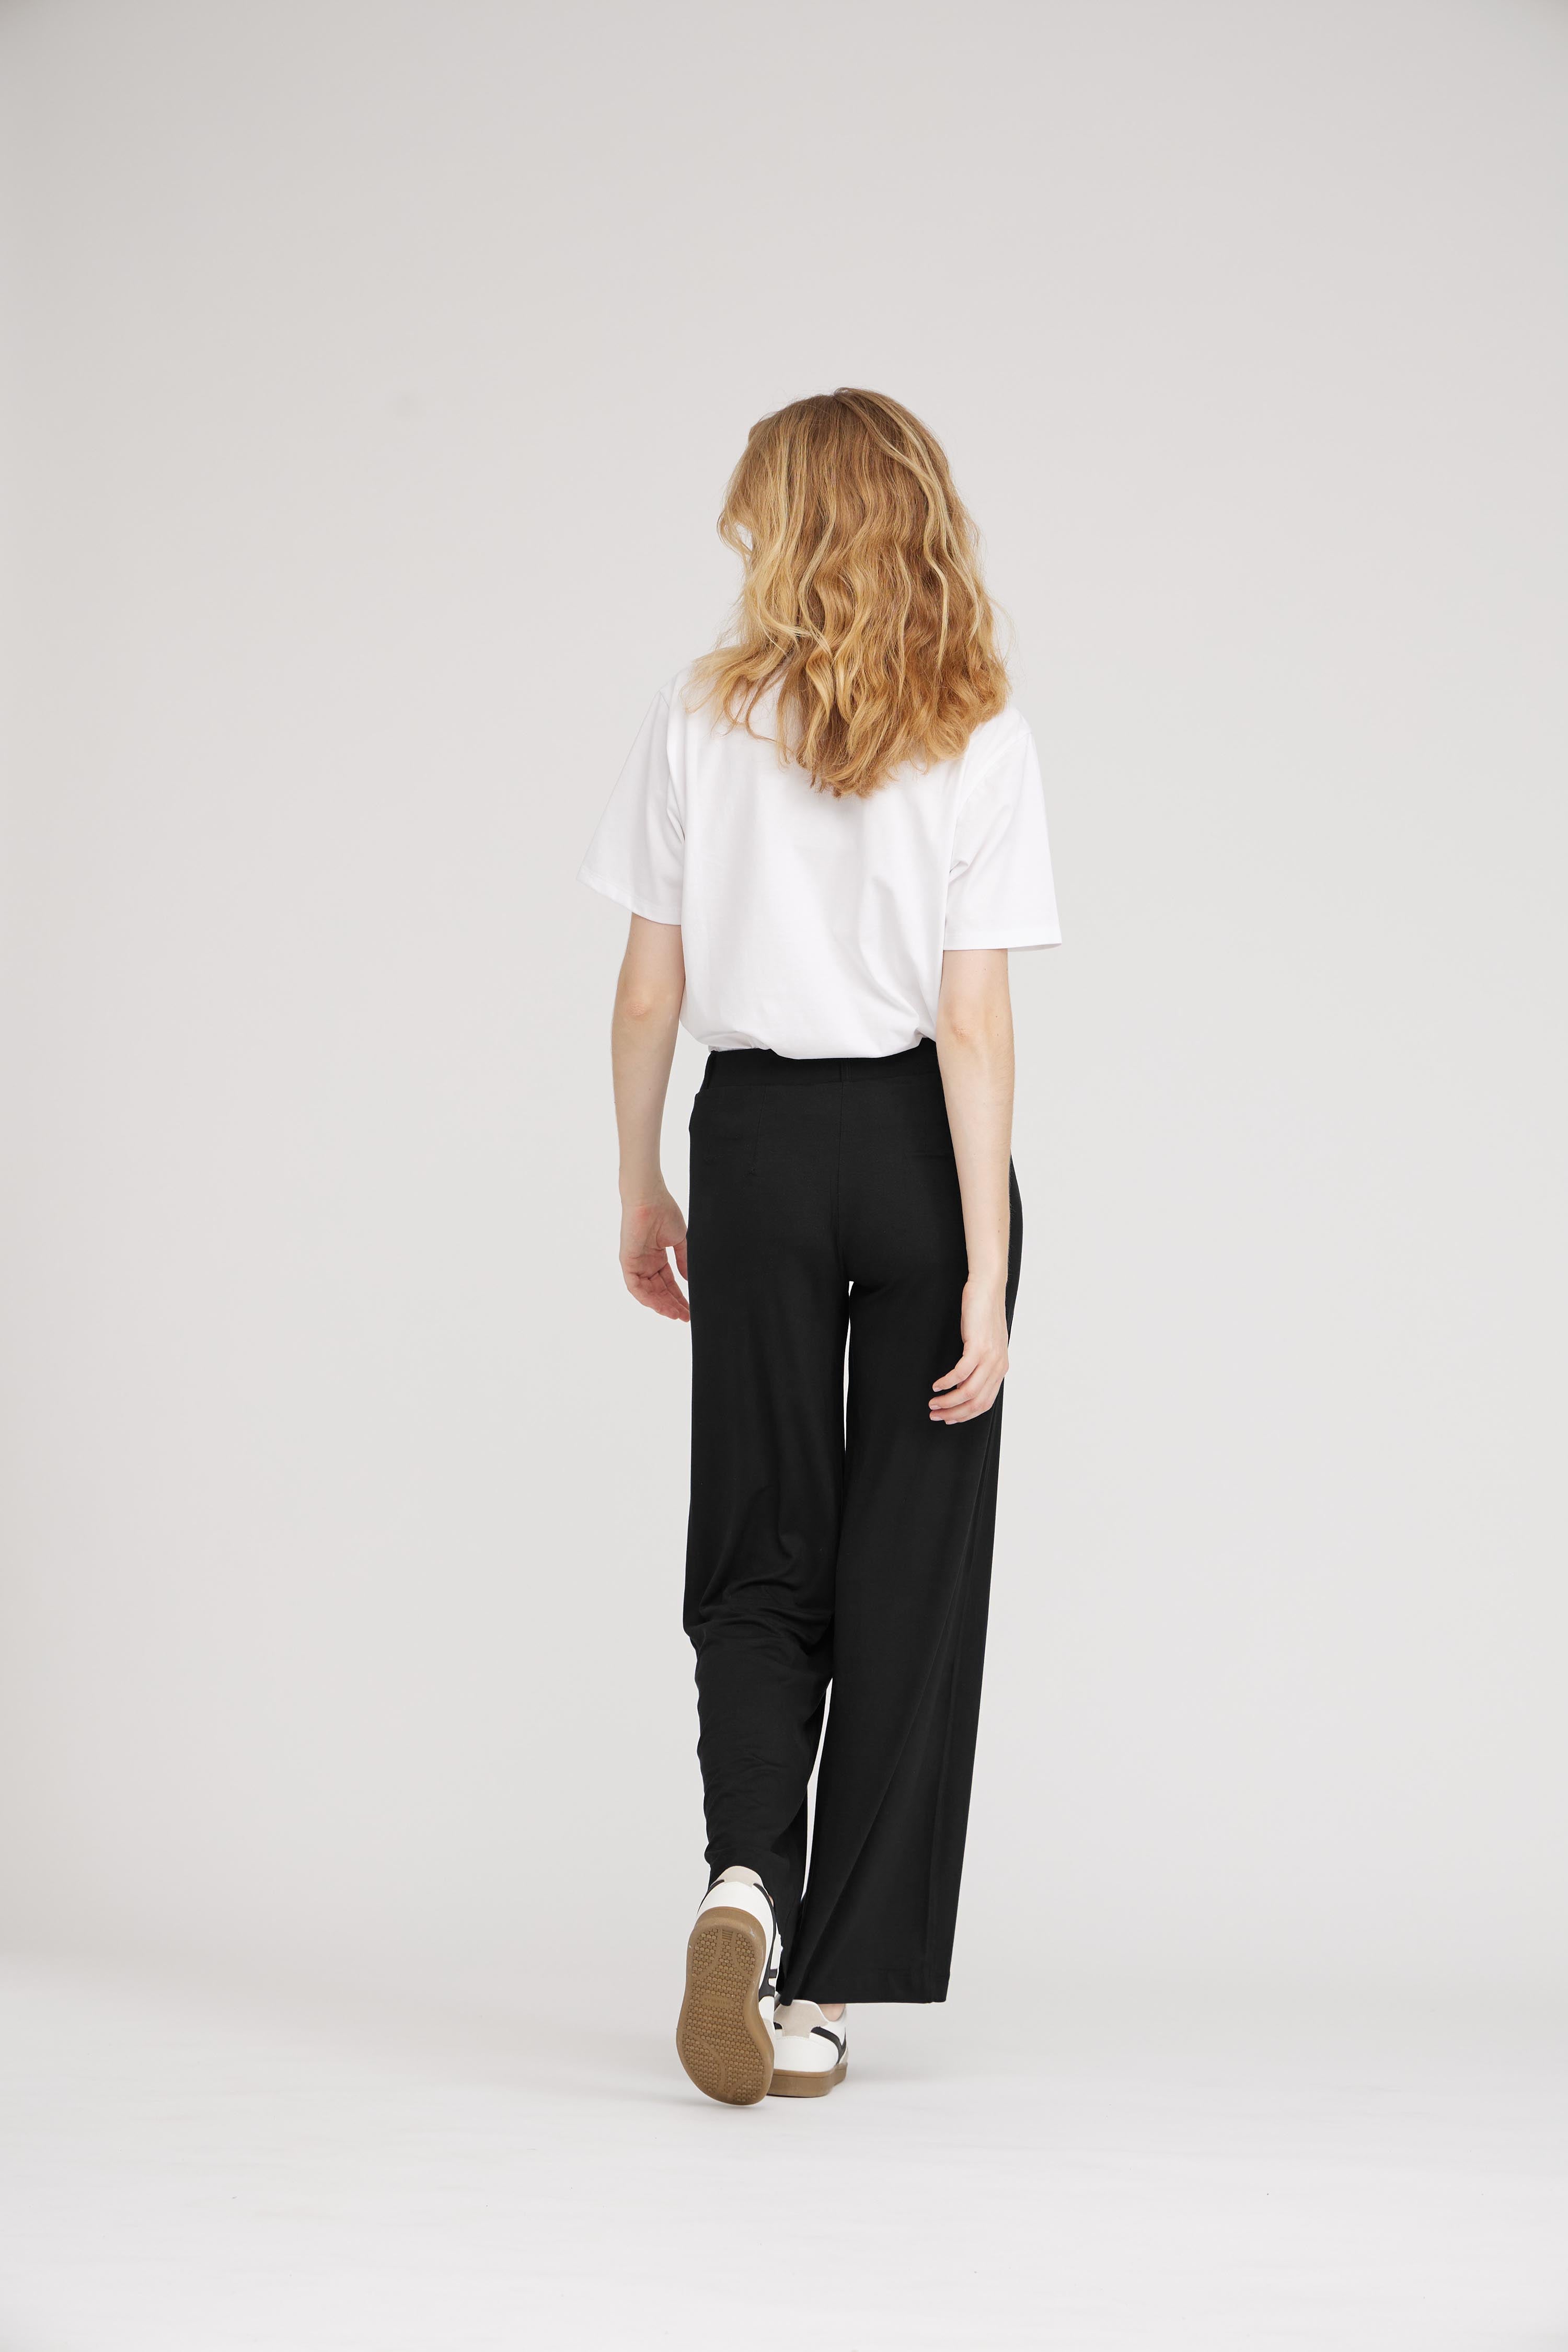 LAURIE Donna Loose Jersey - Short Length Trousers LOOSE 99104 Black